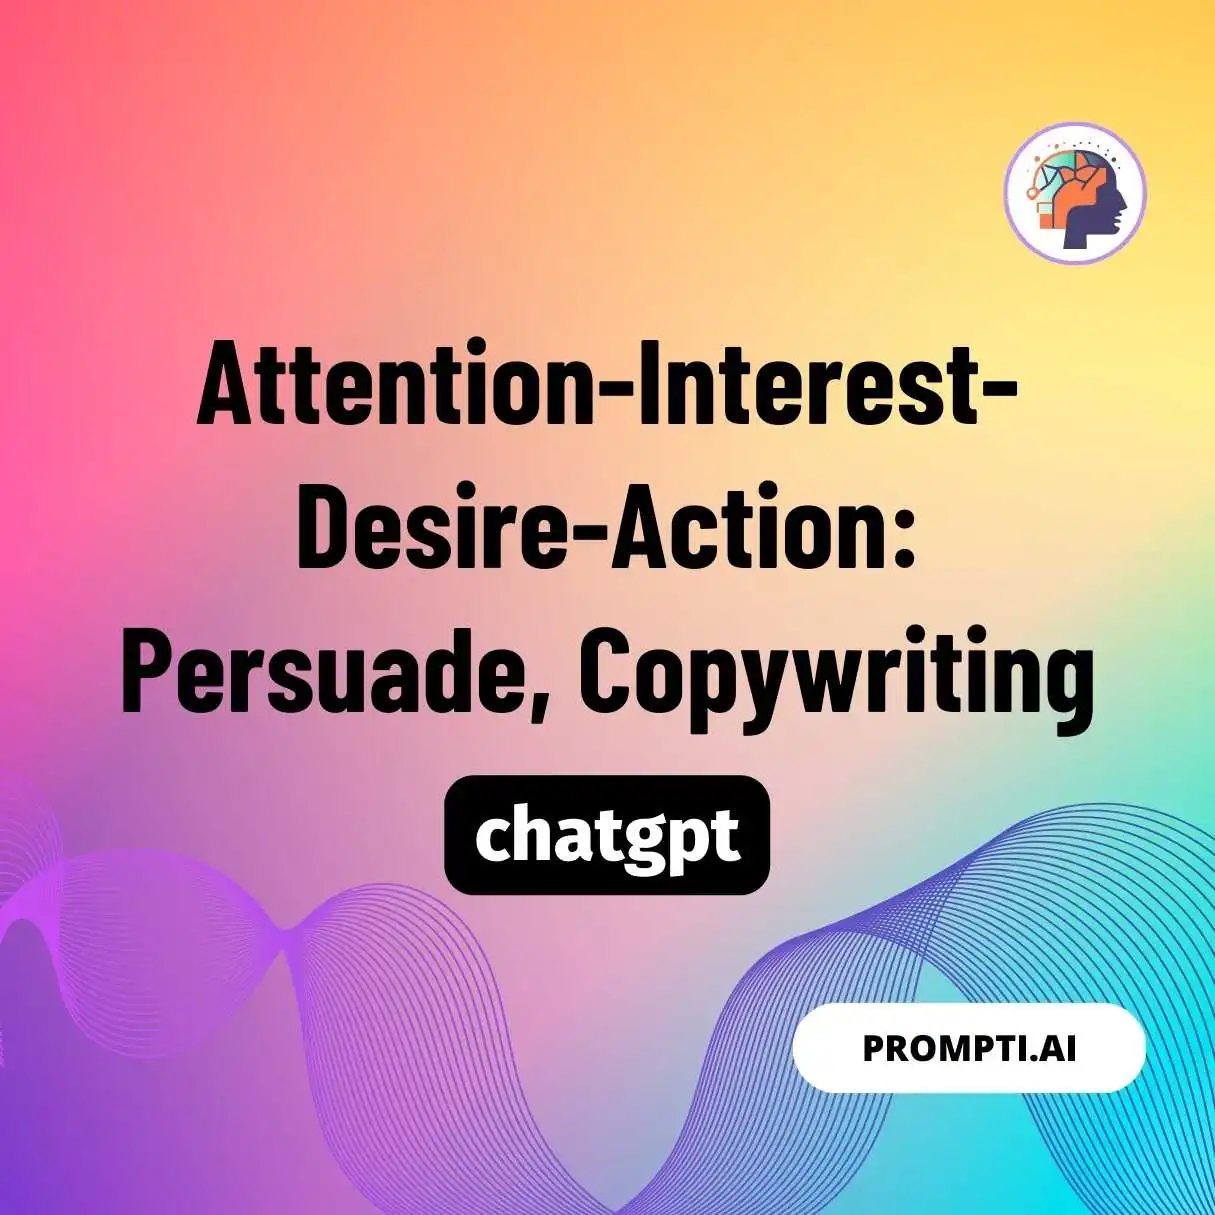 Attention-Interest-Desire-Action: Persuade, Copywriting